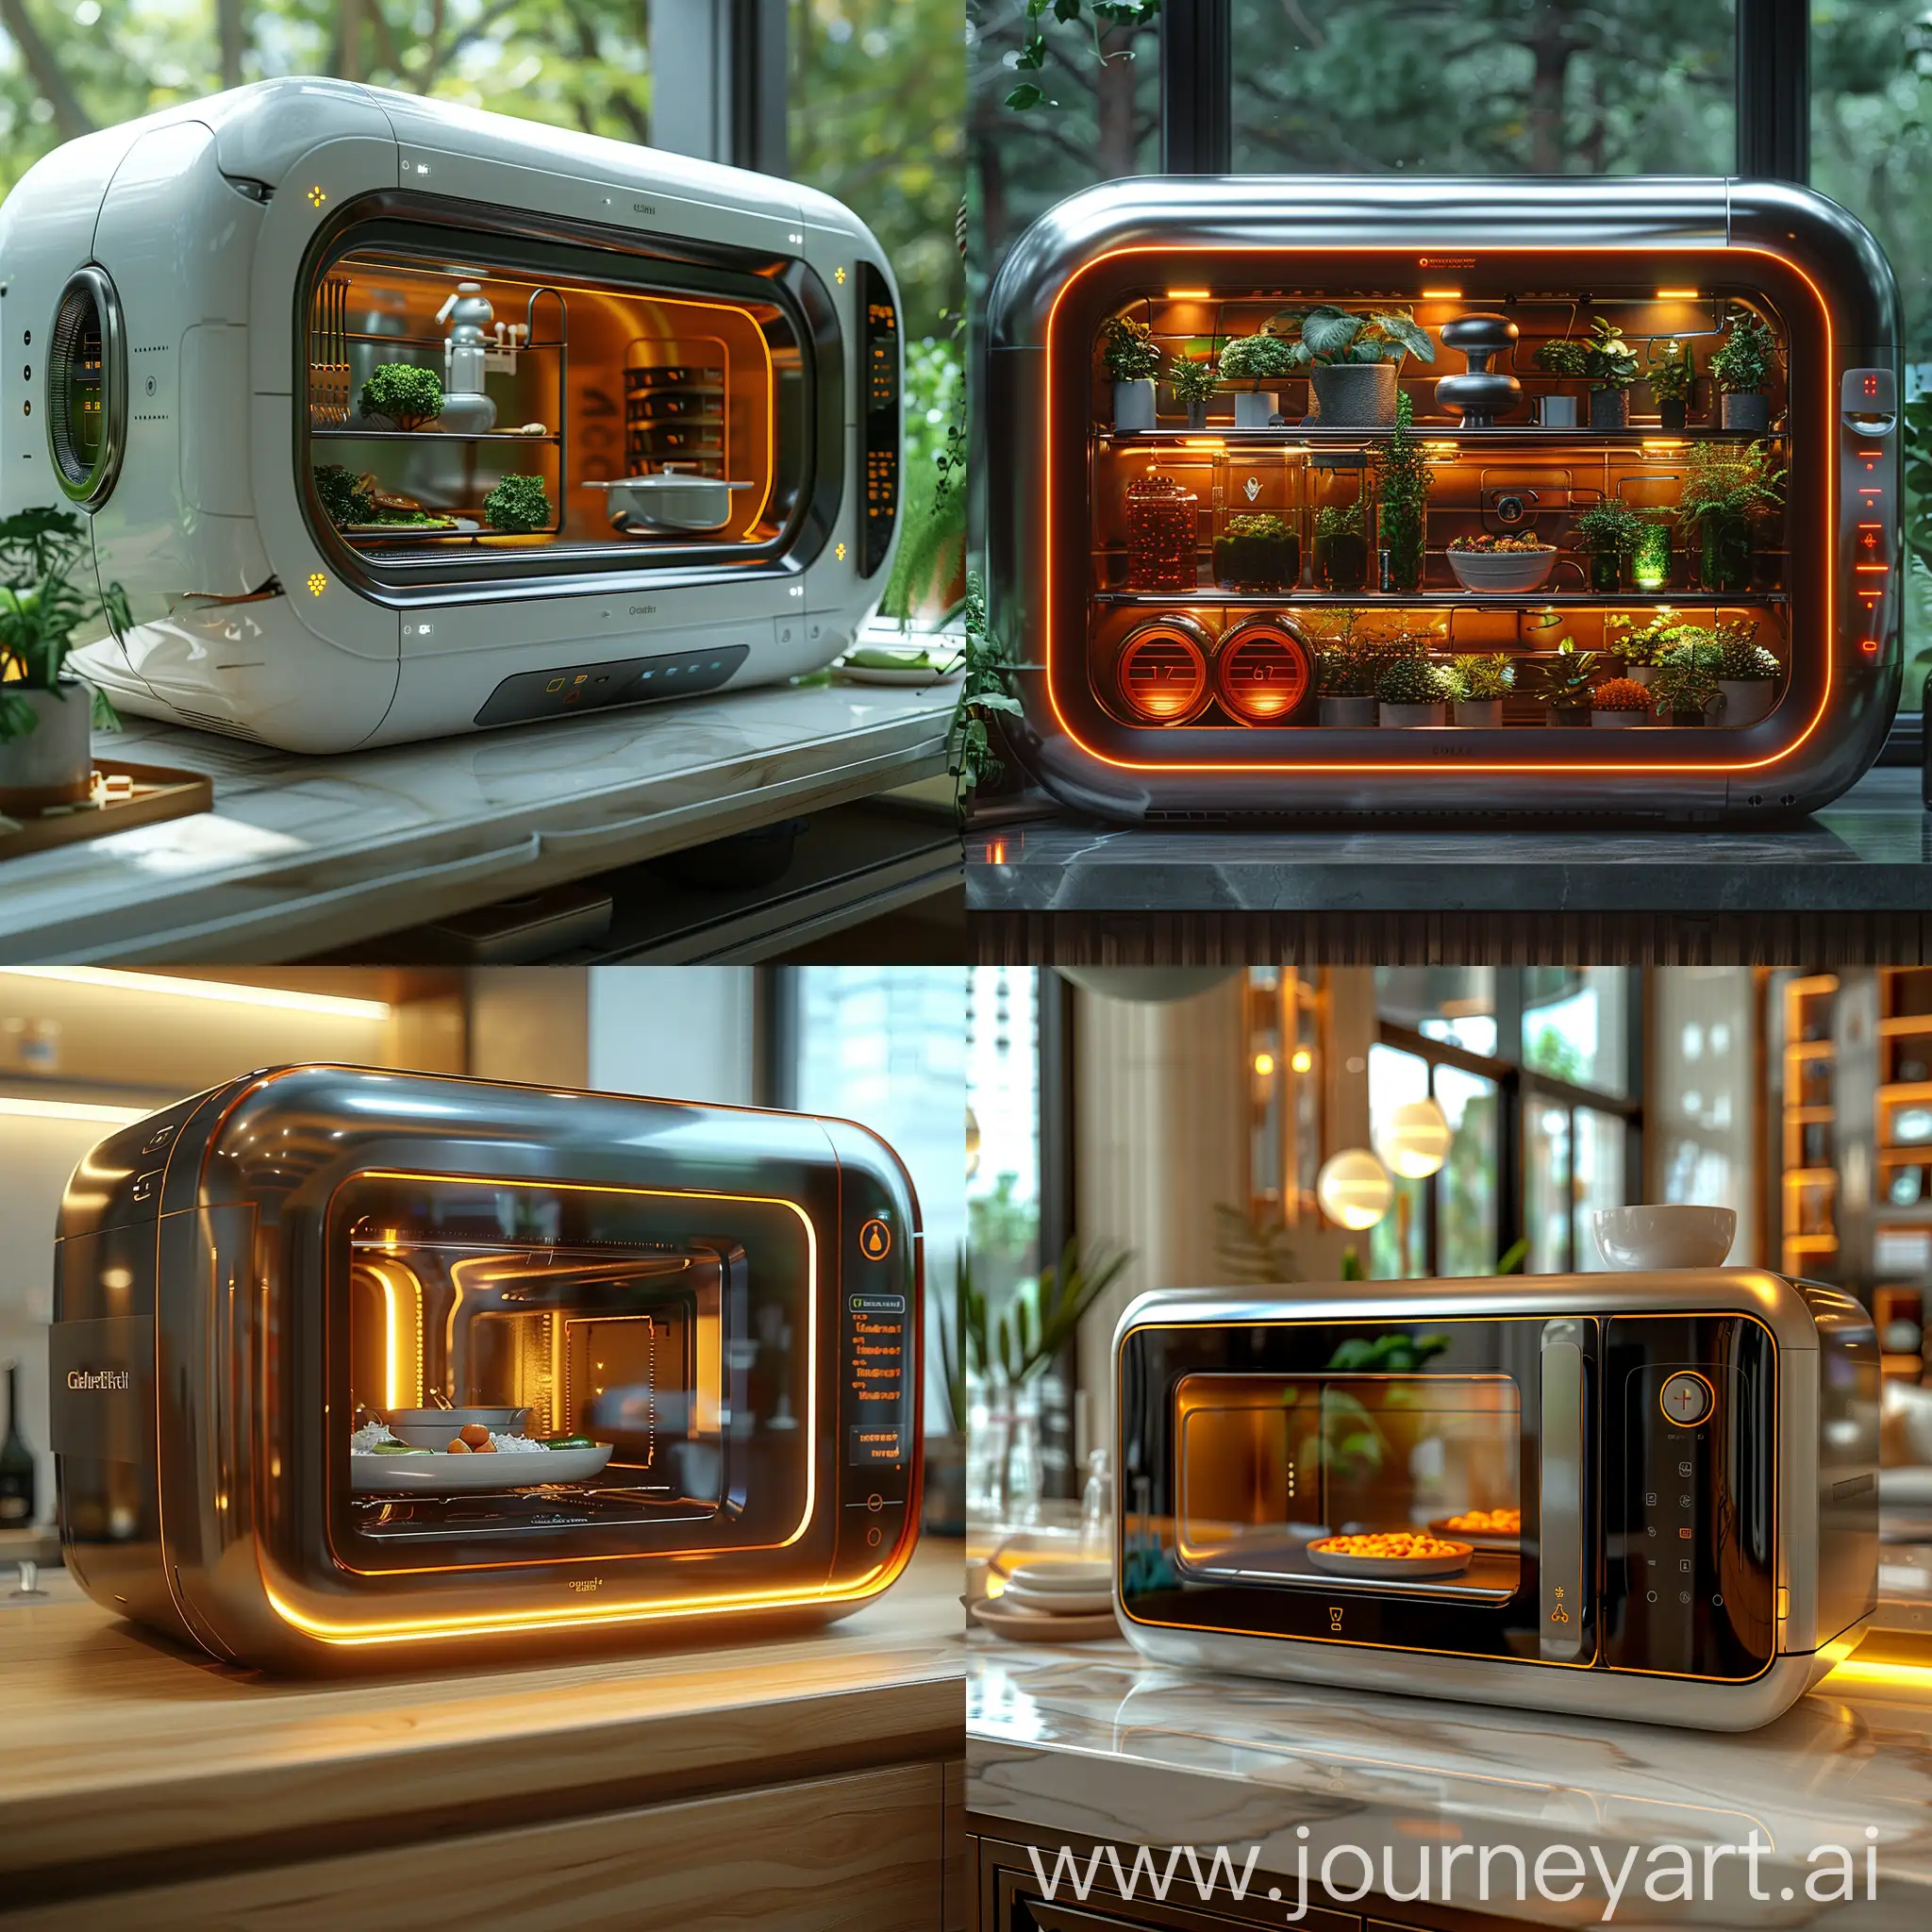 Futuristic microwave, in 2473, Sleek Design, AI Chef, Molecular Reconstruction, Nutrient Preservation, Voice Control, Holographic Recipe Projection, Self-Cleaning, octane render --stylize 1000